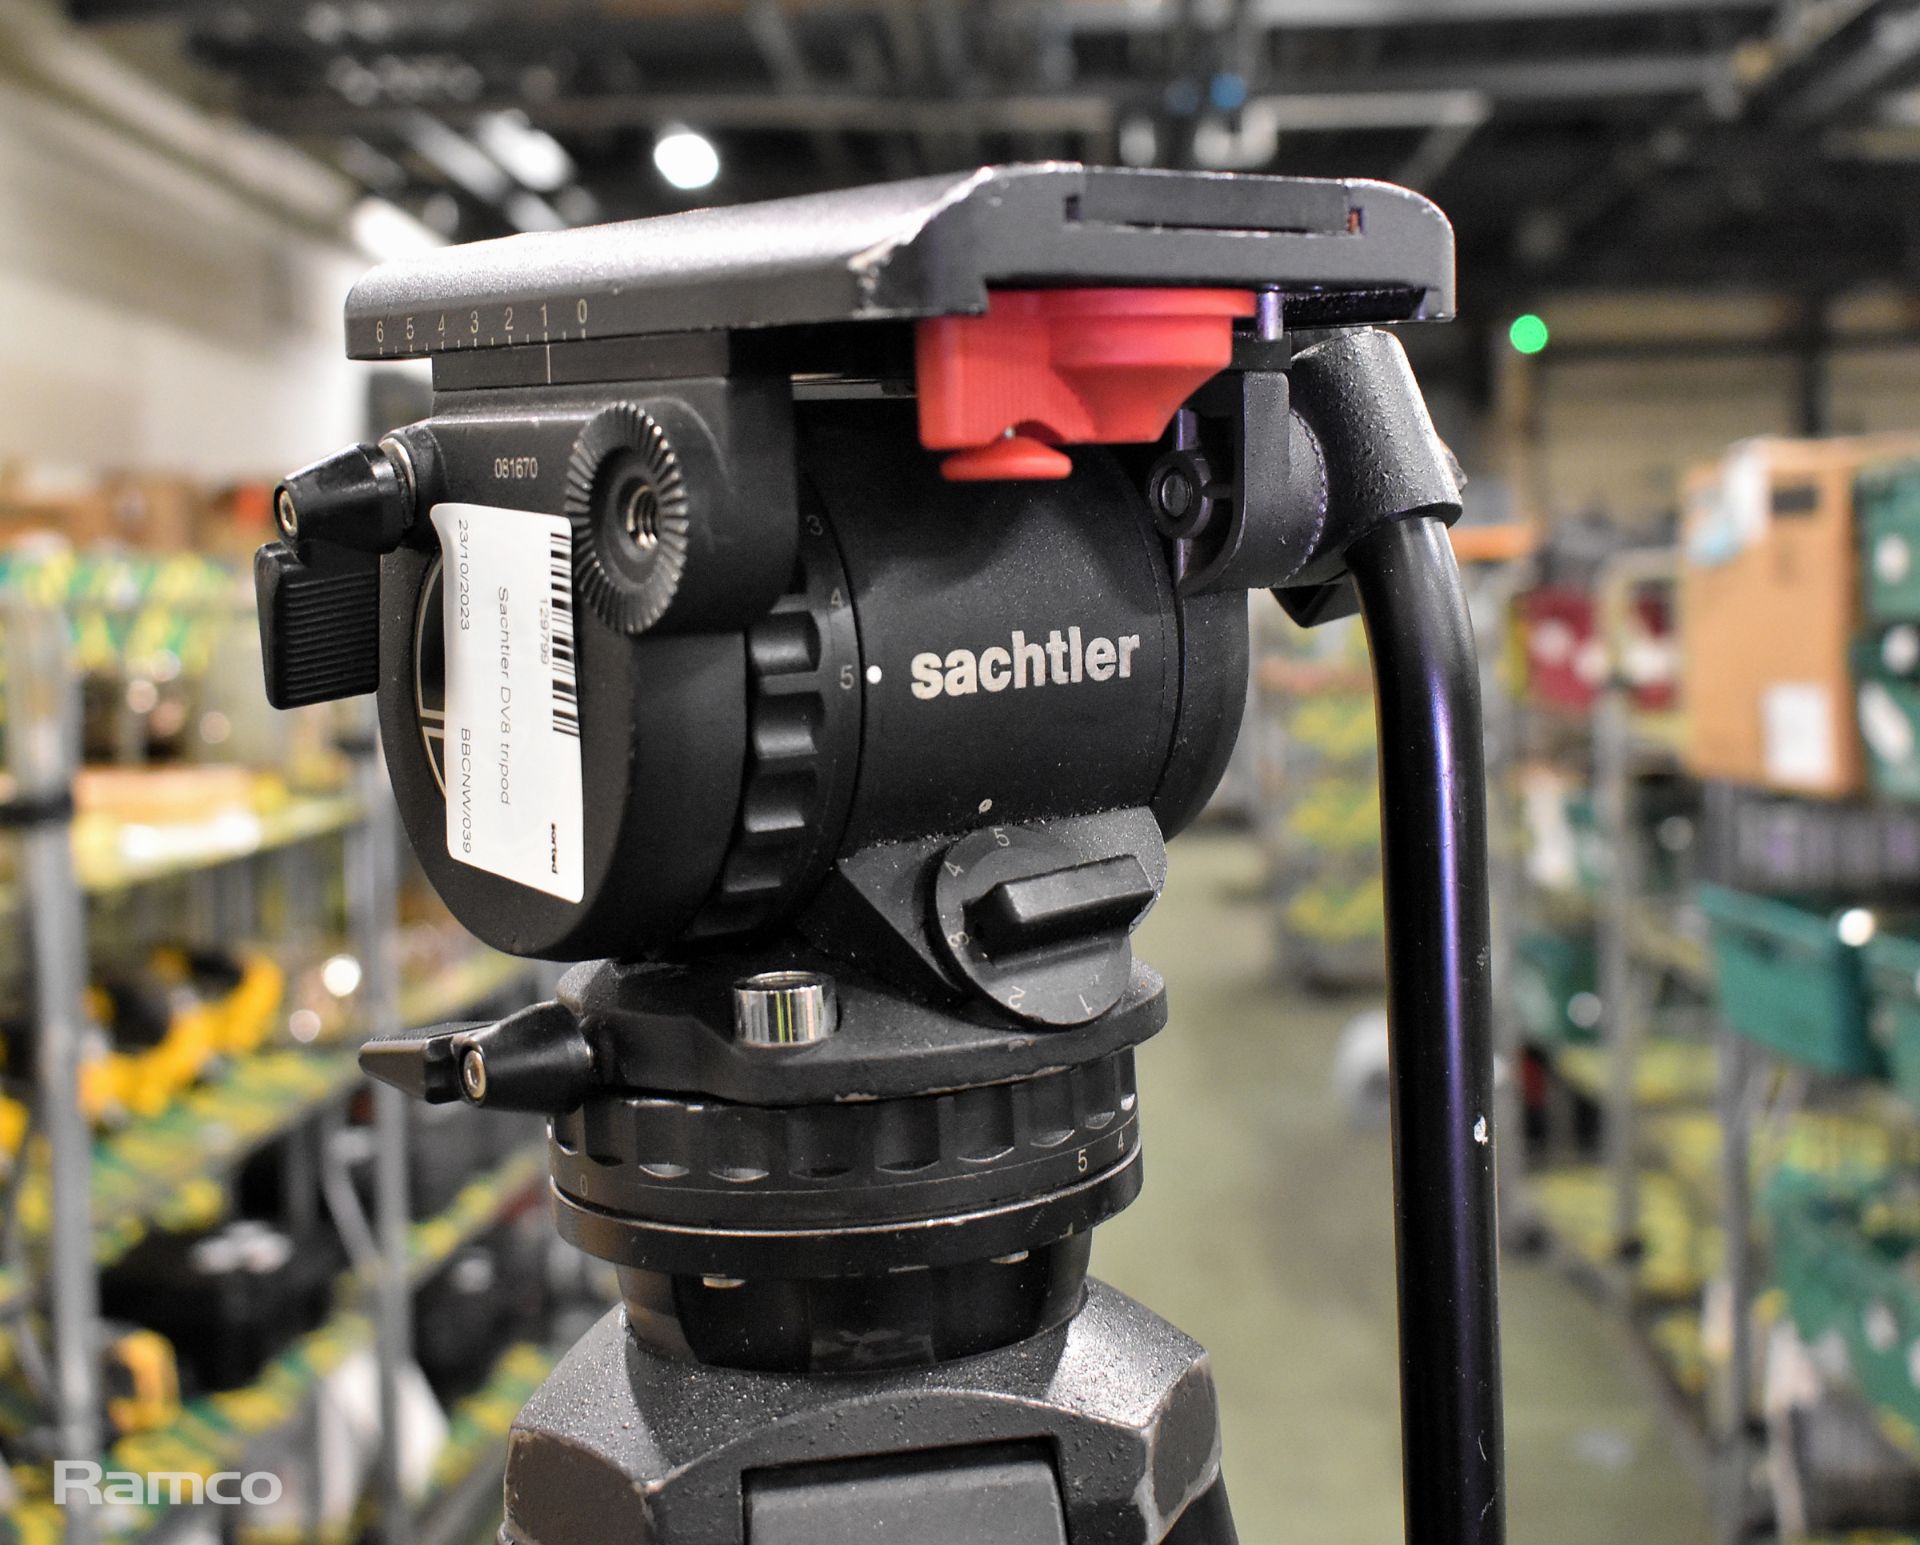 Sachtler DV8 tripod with optex head unit - Image 4 of 6